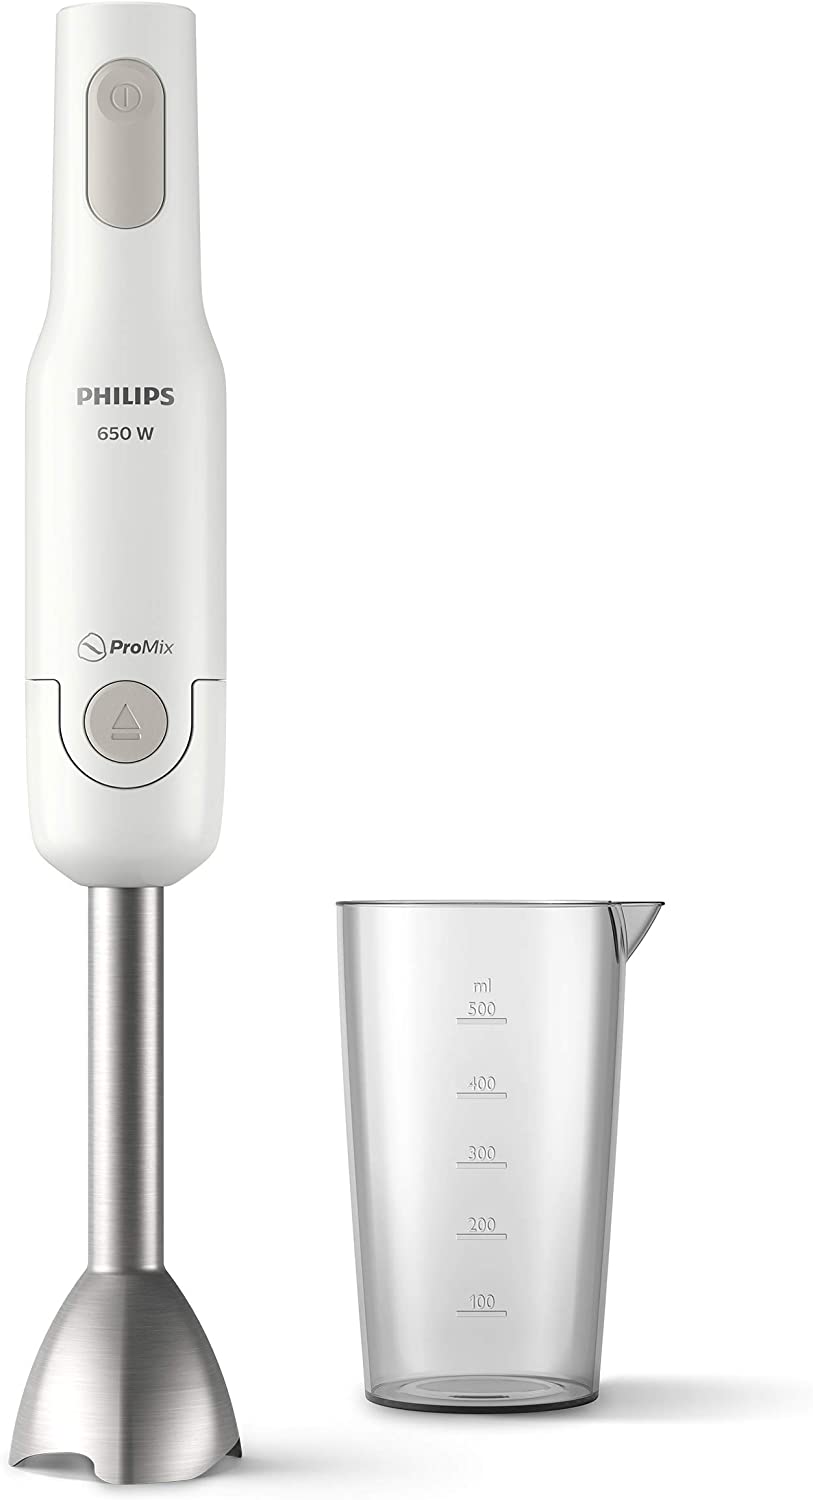 Philips Domestic Appliances PHILIPS ProMix Hand Blender with Plastic Bar, 650 W, Splash Guard, Includes